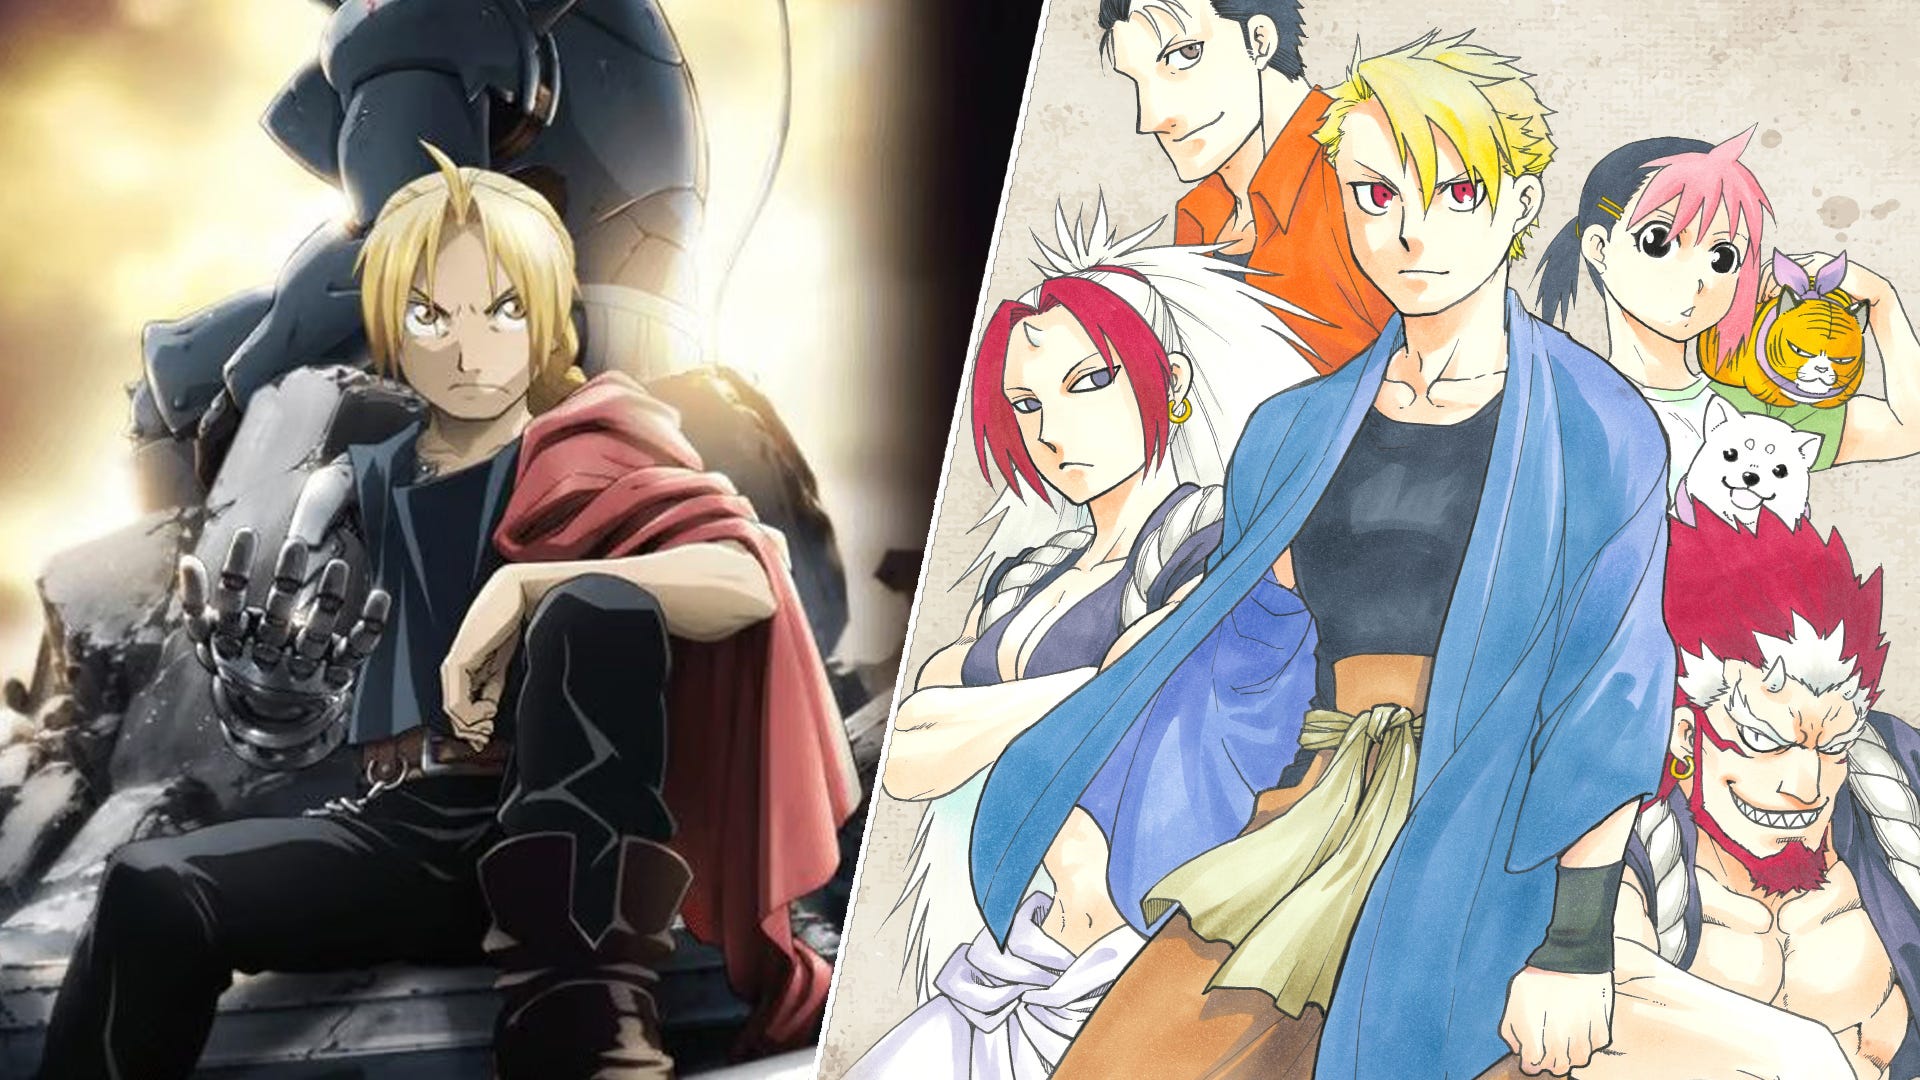 Fullmetal Alchemist fans are doing themselves a disservice by not reading its creator’s latest manga